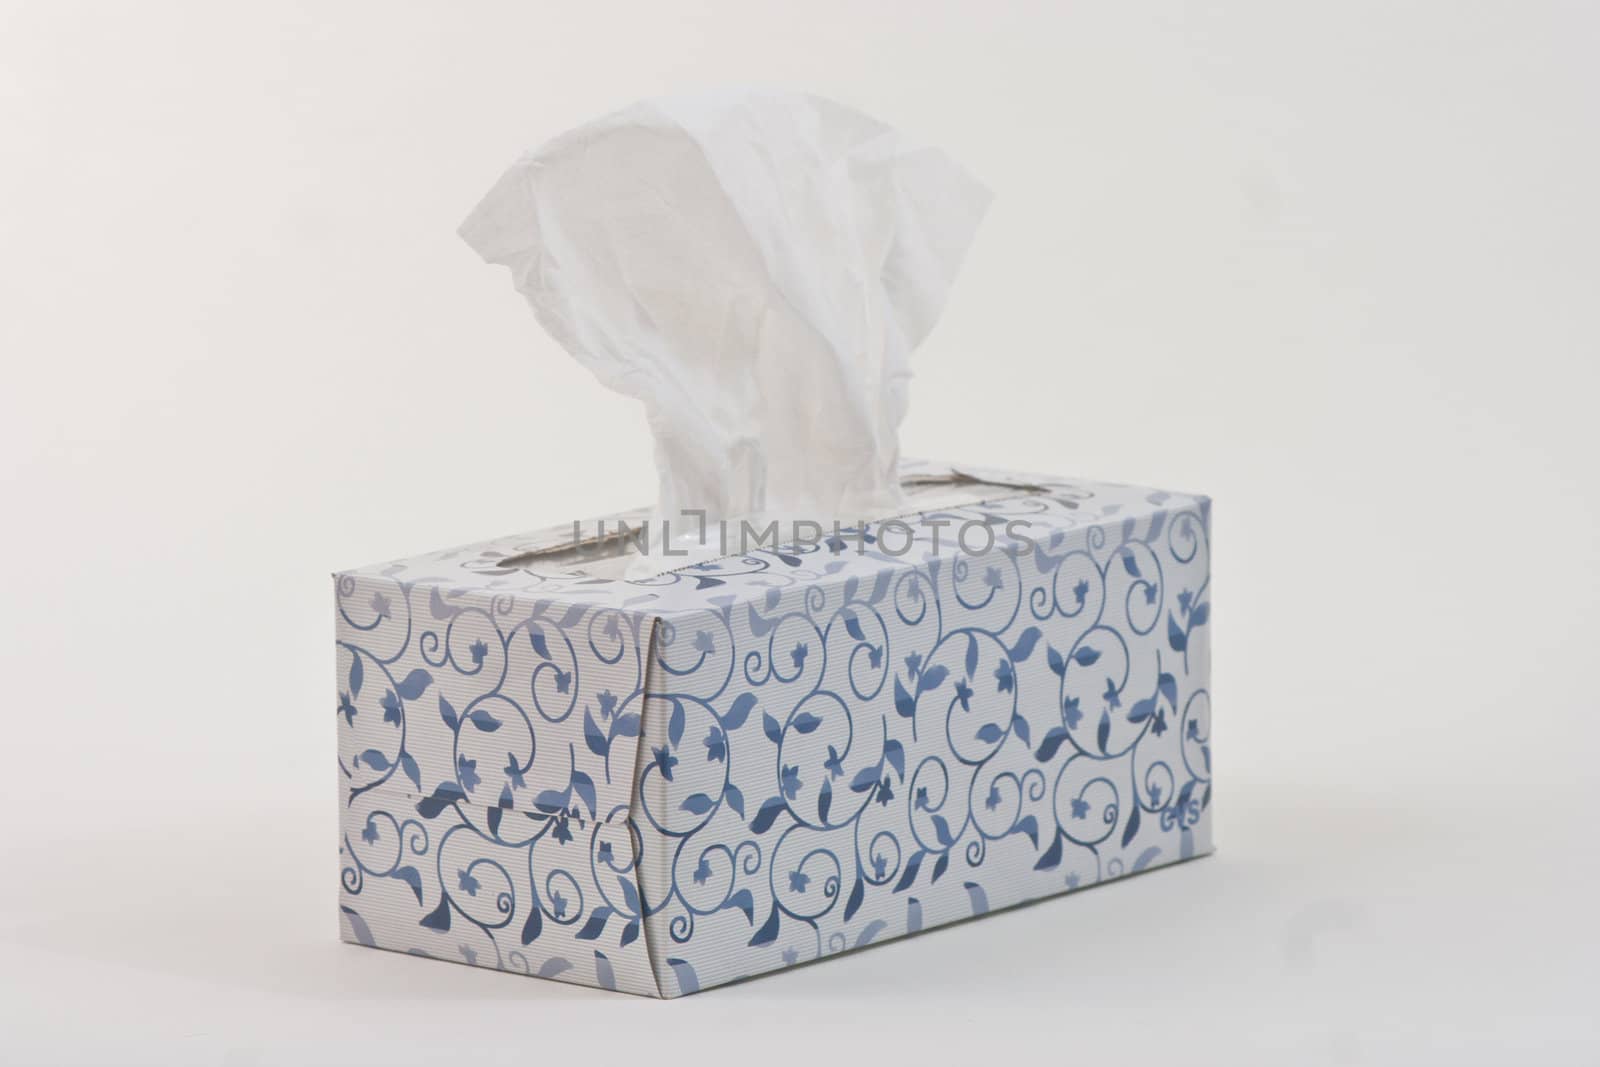 Tissue exposed from the box.